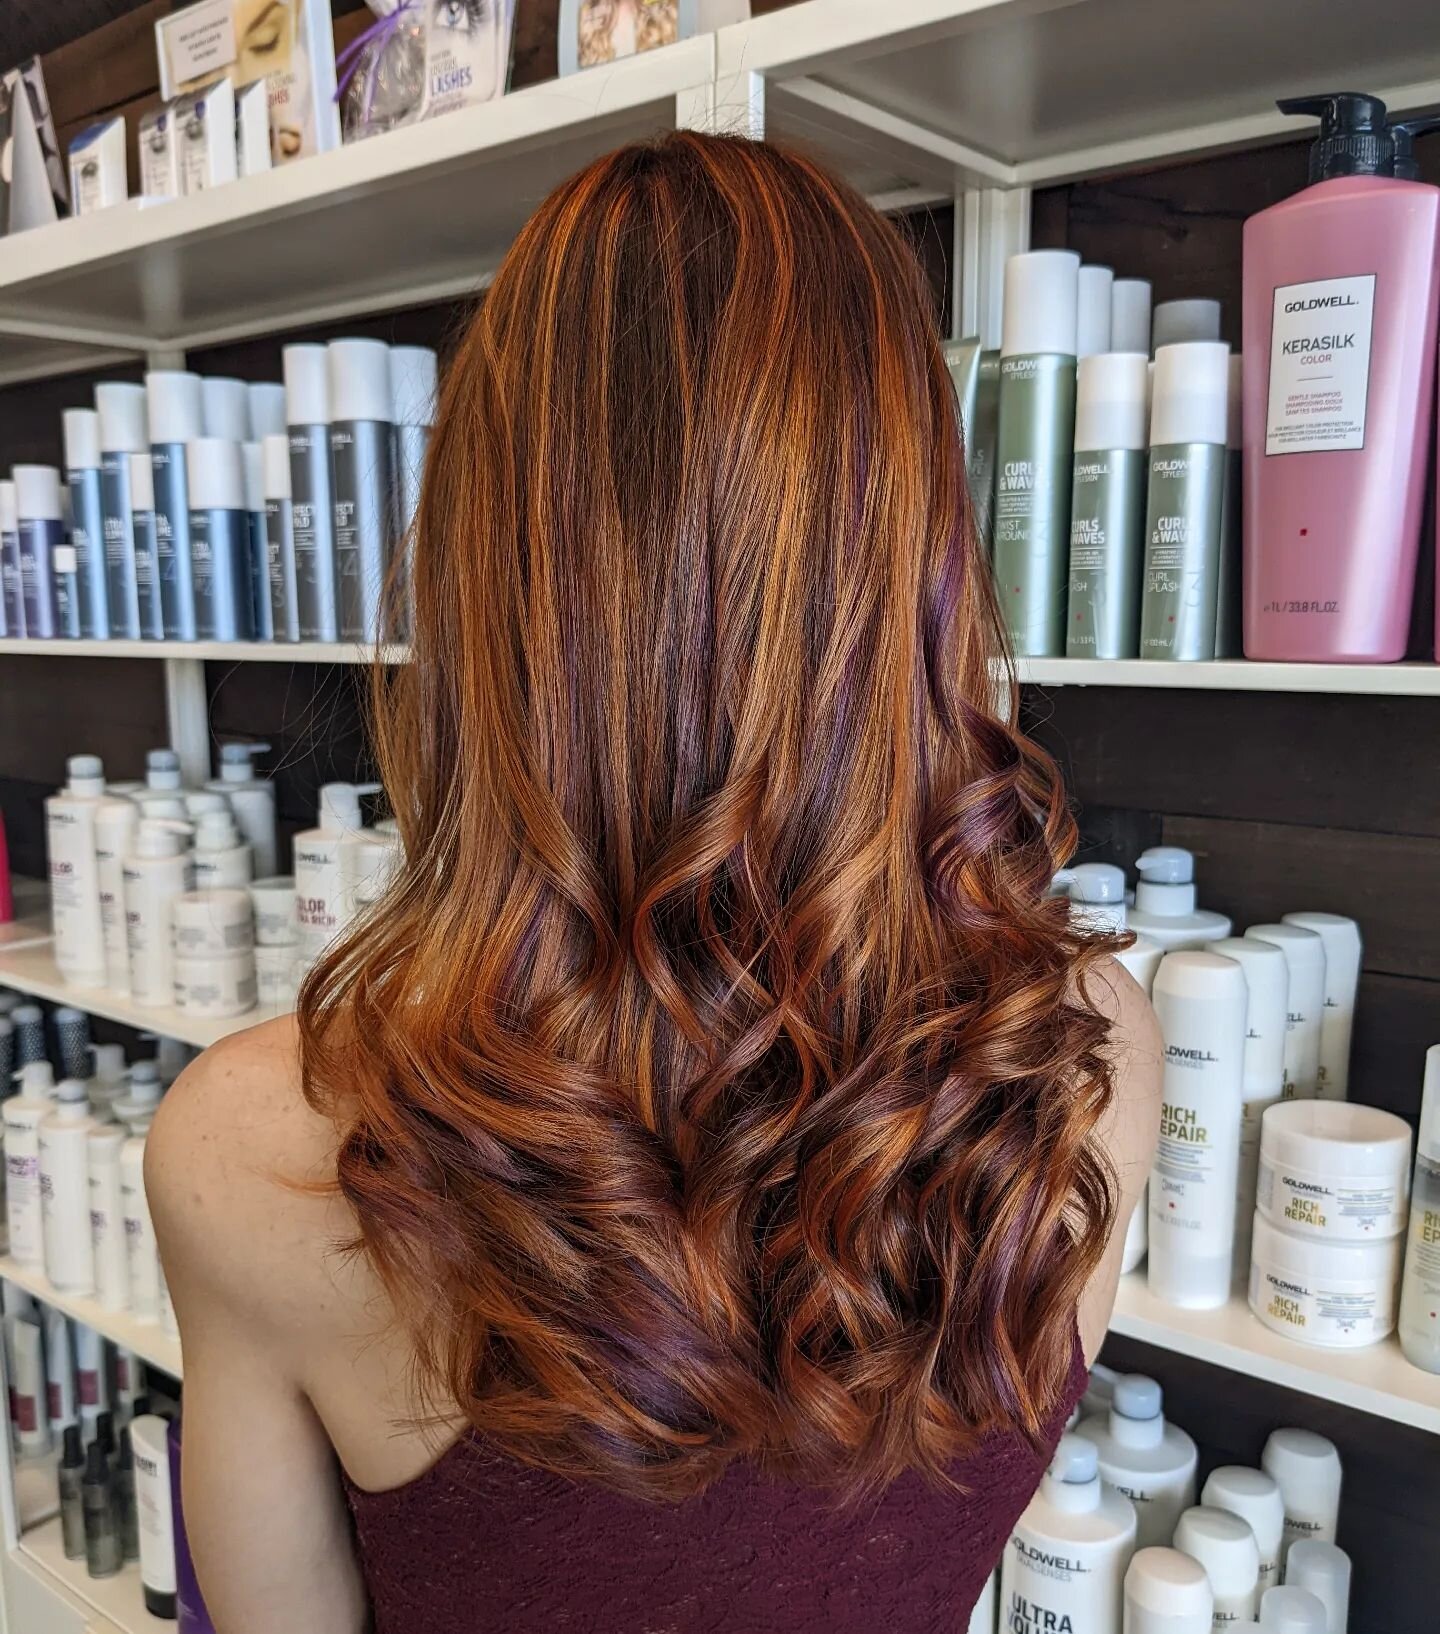 It's never too early for fall colored hair! We love our coppers! 🍂🧡 Color by Katy @hairbykatygray 
.
.
.
#goldwell #goldwellcolor #goldwellapprovedus #copperhair #fallhair #fallvibes #purplelowlights #balayage #baltimorehair #baltimoresalon #baltim